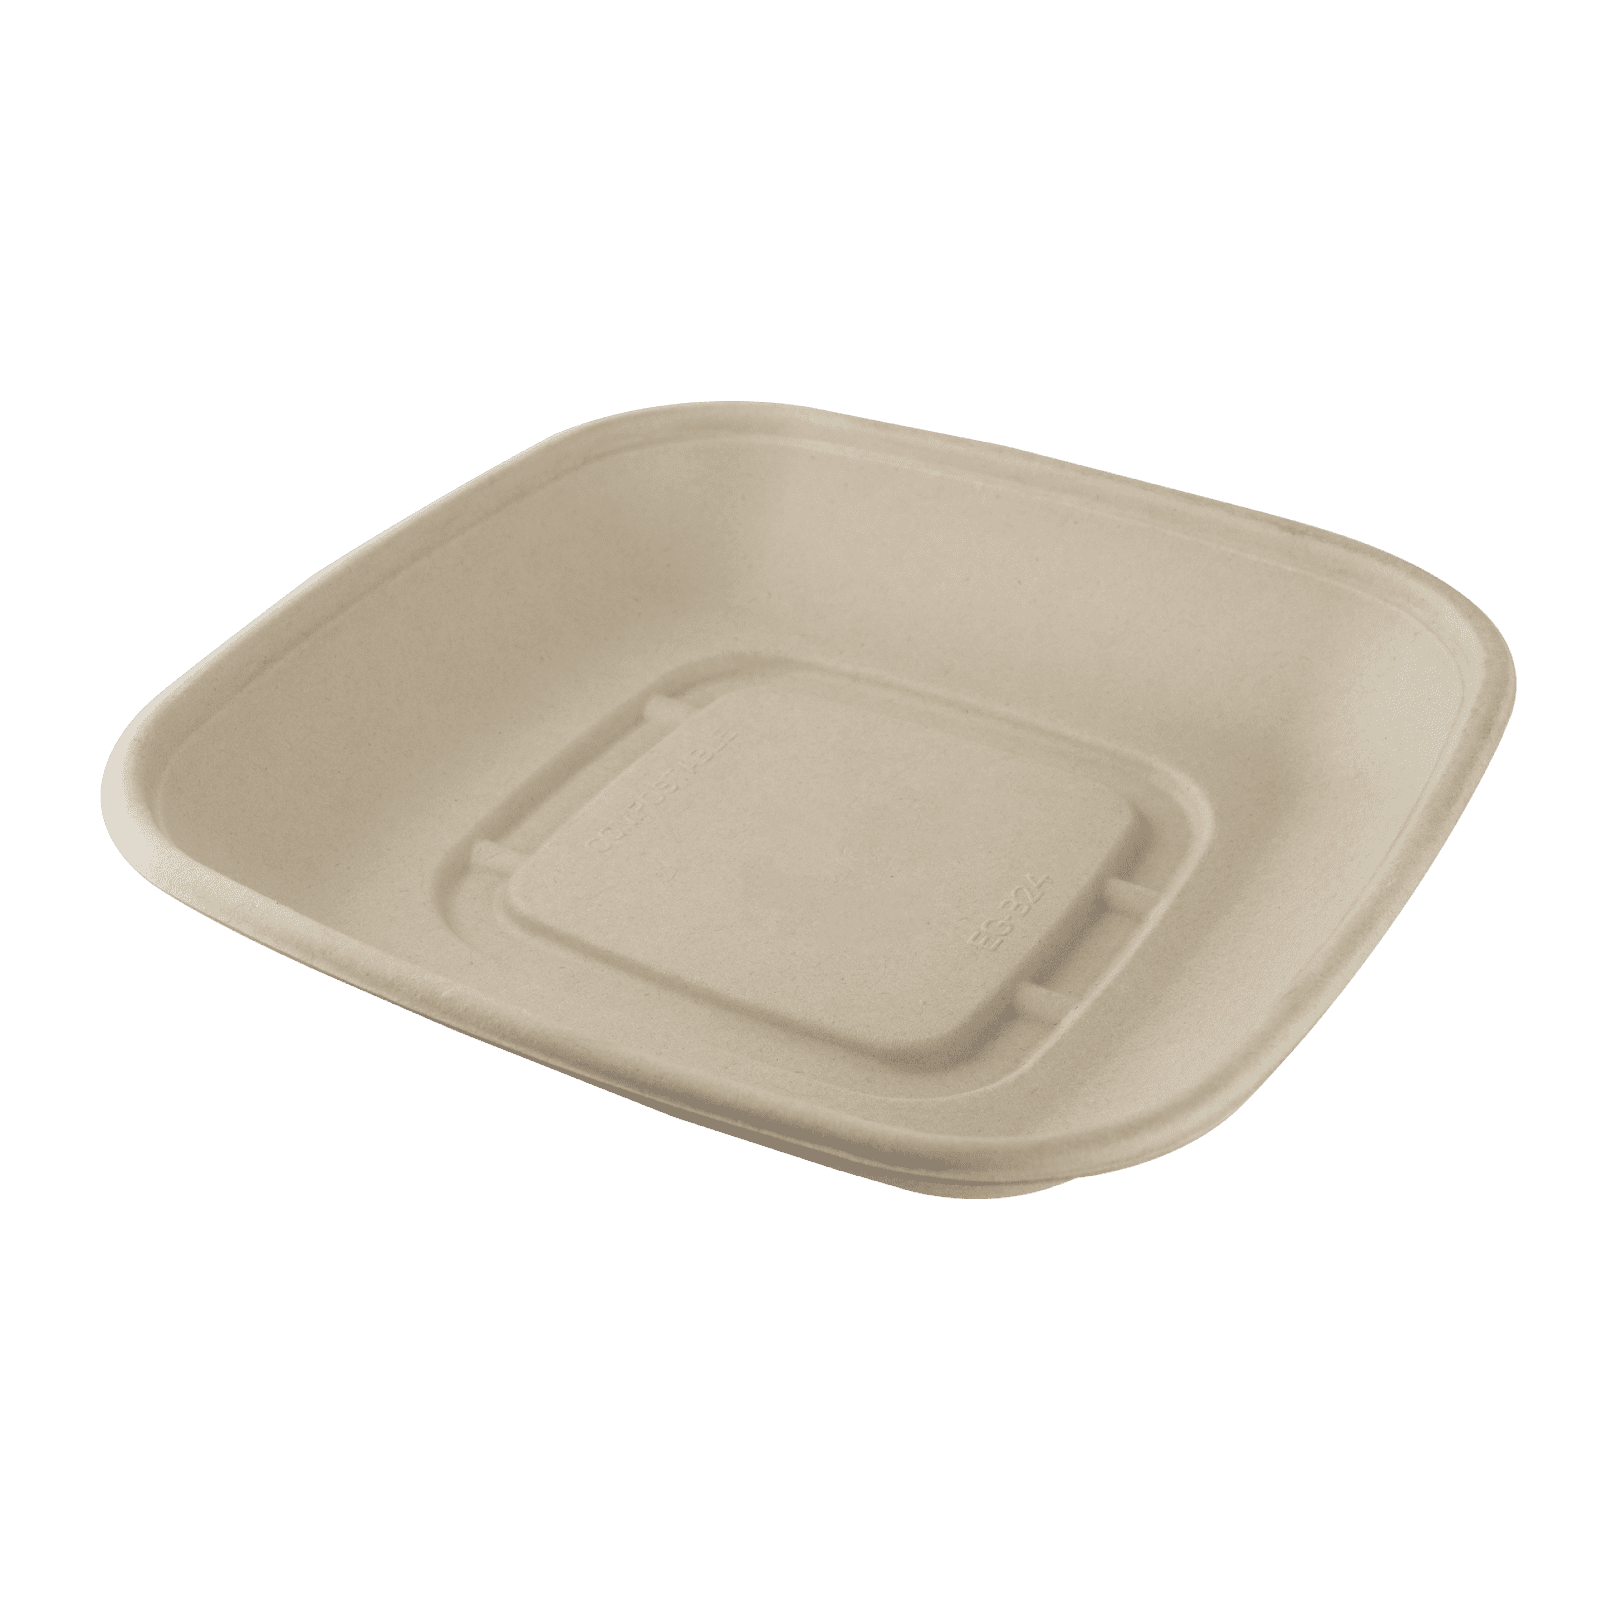 Enpak compostable take out containers 24 oz with clear lids CB-24